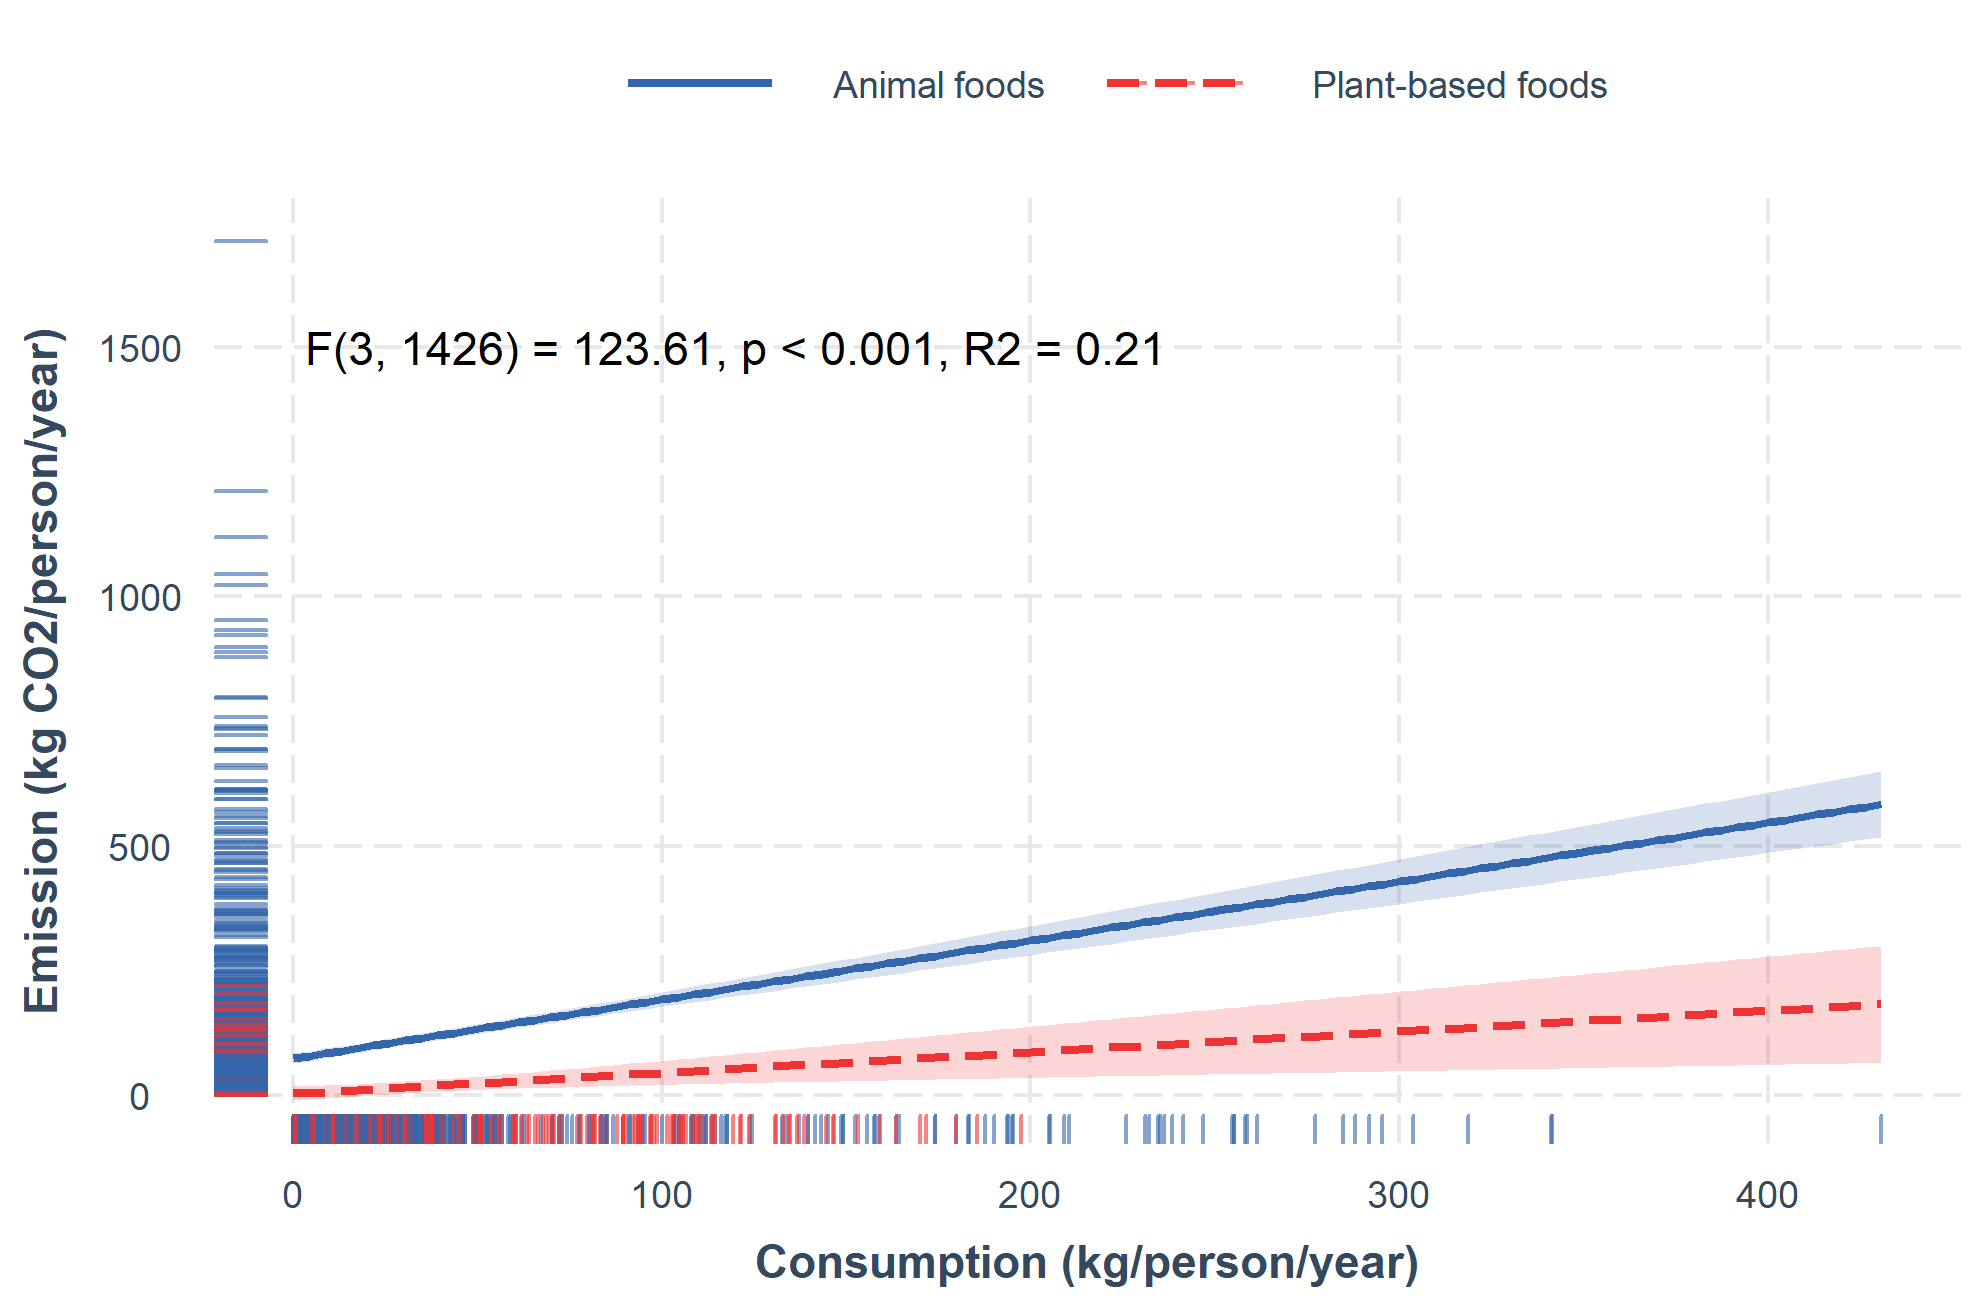 Although CO2 emissions increase with consumption, regardless of food type, an interaction model shows us that on average CO2 emissions are higher with animal-food consumption than with plant-based consumption